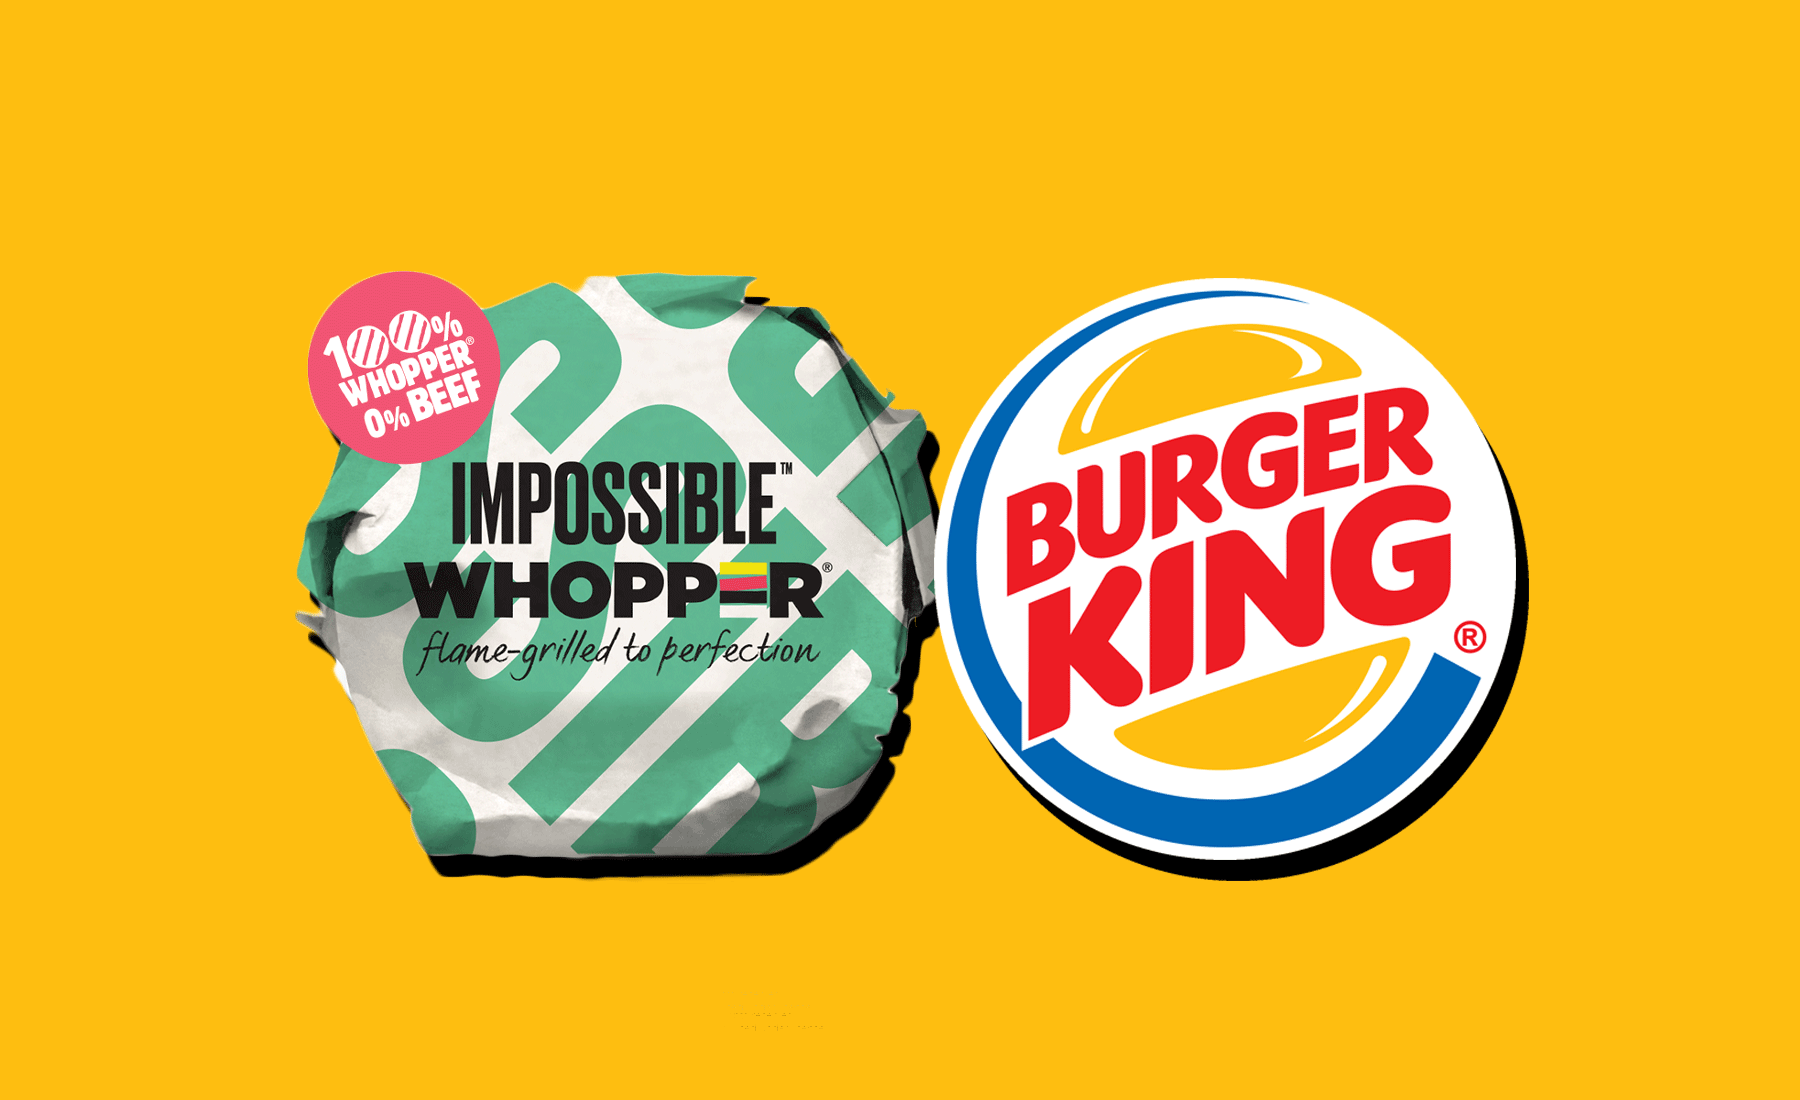 Every Single Burger King Will Serve The Impossible Whopper This